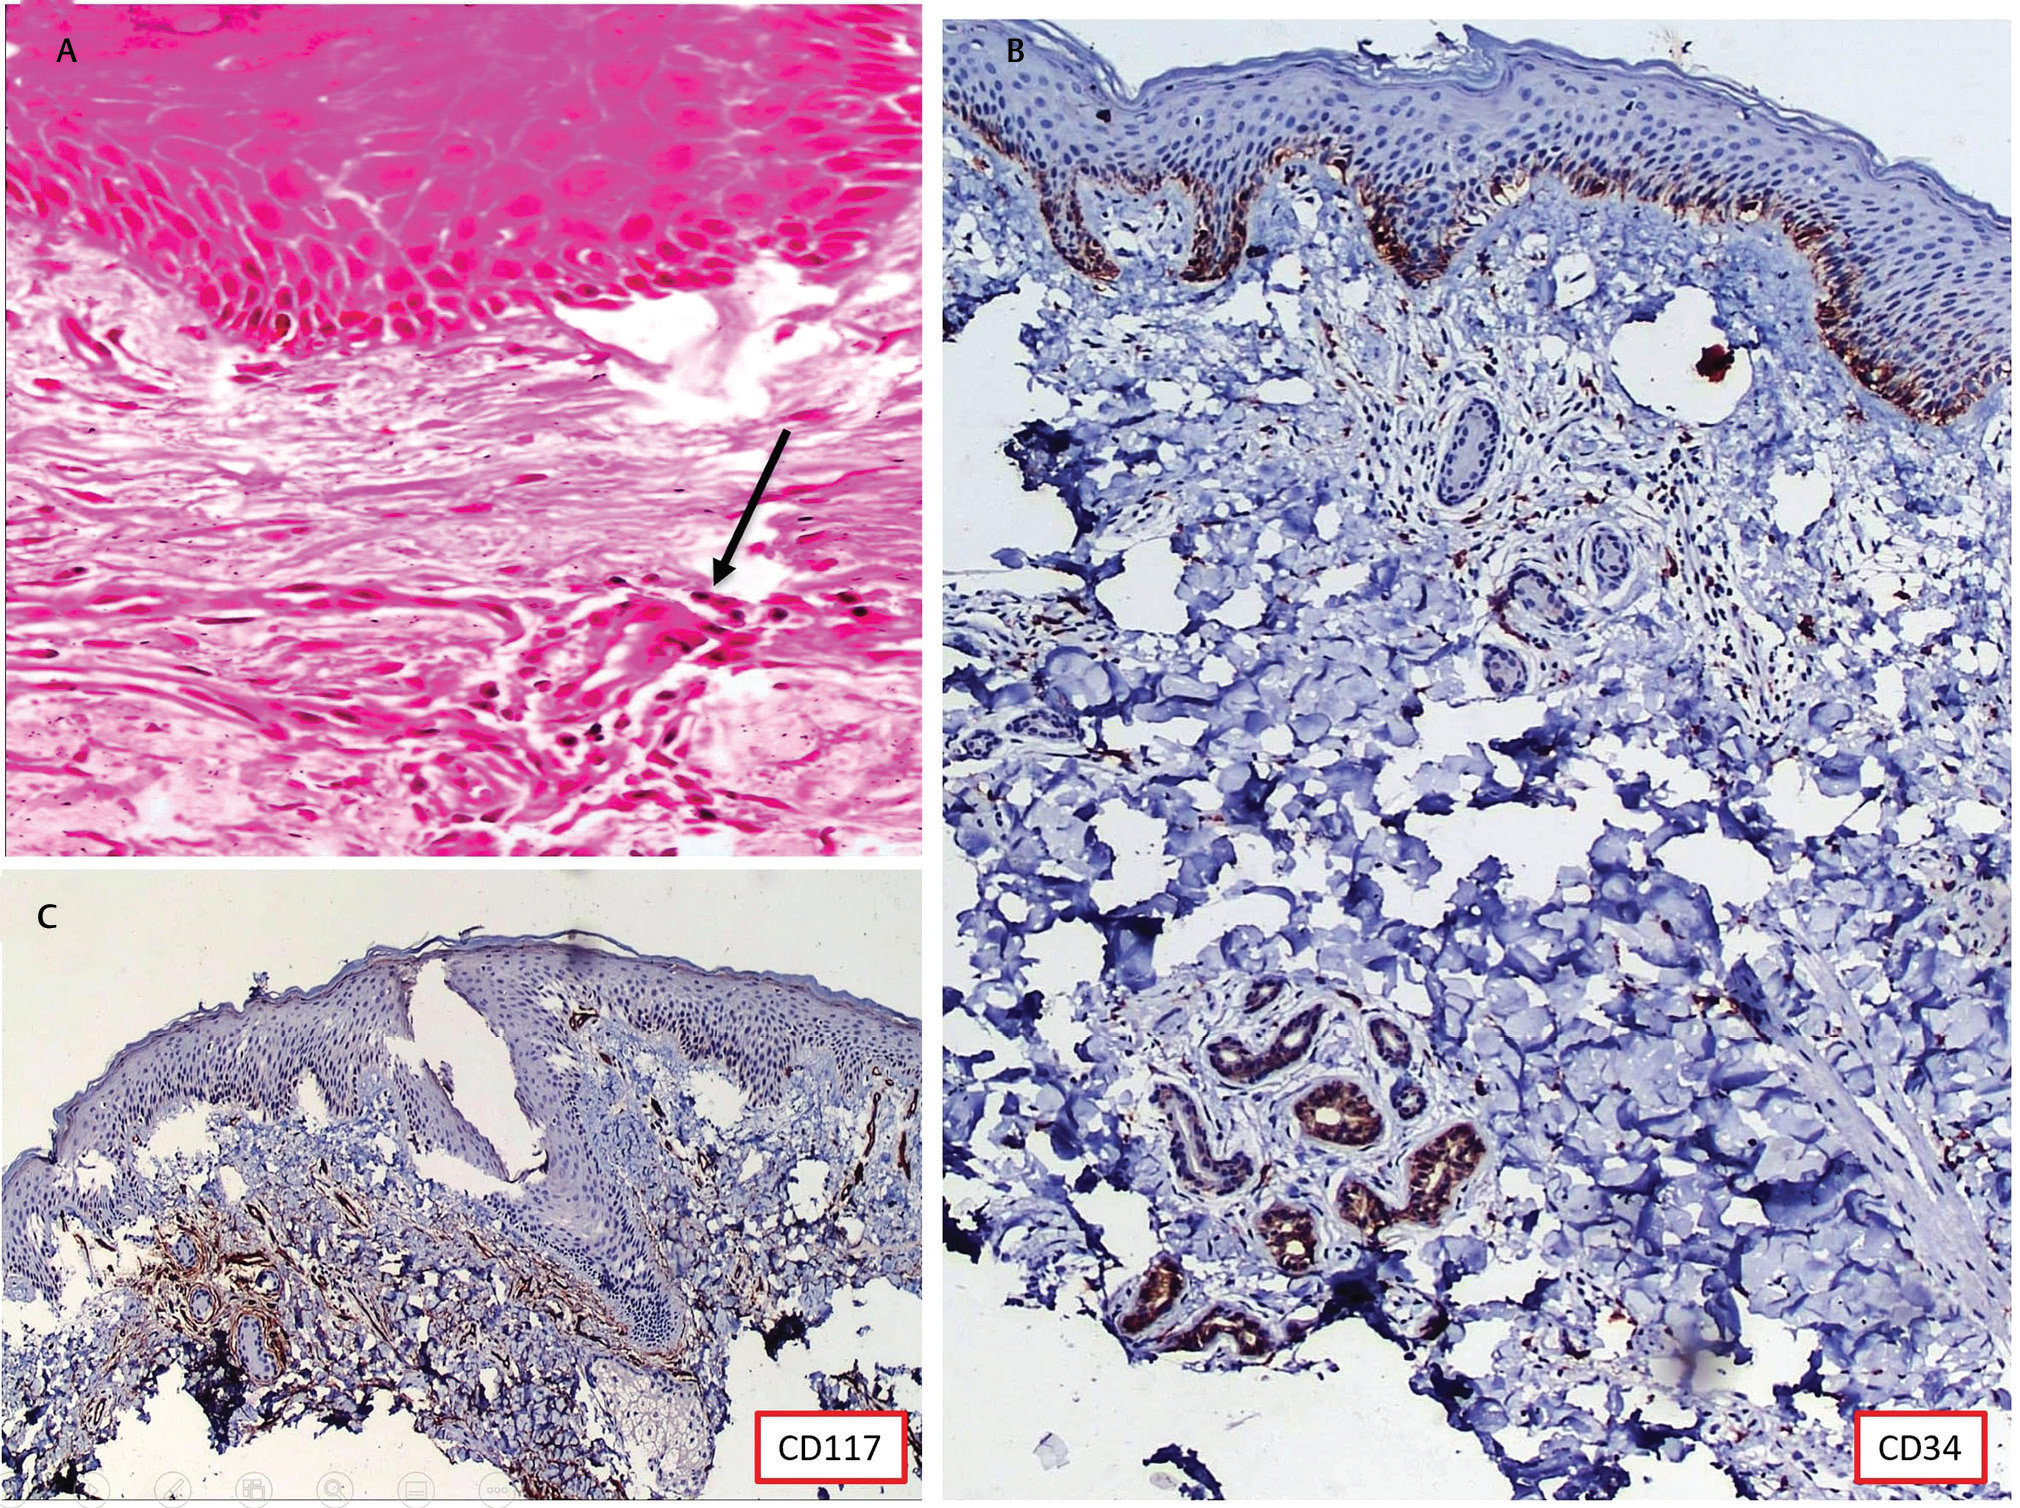 Fig. 6 (A) Dermis shows superficial dermal vessels with few extravasated large atypical cells (black arrow; hematoxylin & eosin [H&E] 400x). (B) Immunohistochemistry (IHC) CD34 positive (100x). (C) IHC CD117 positive (100x).